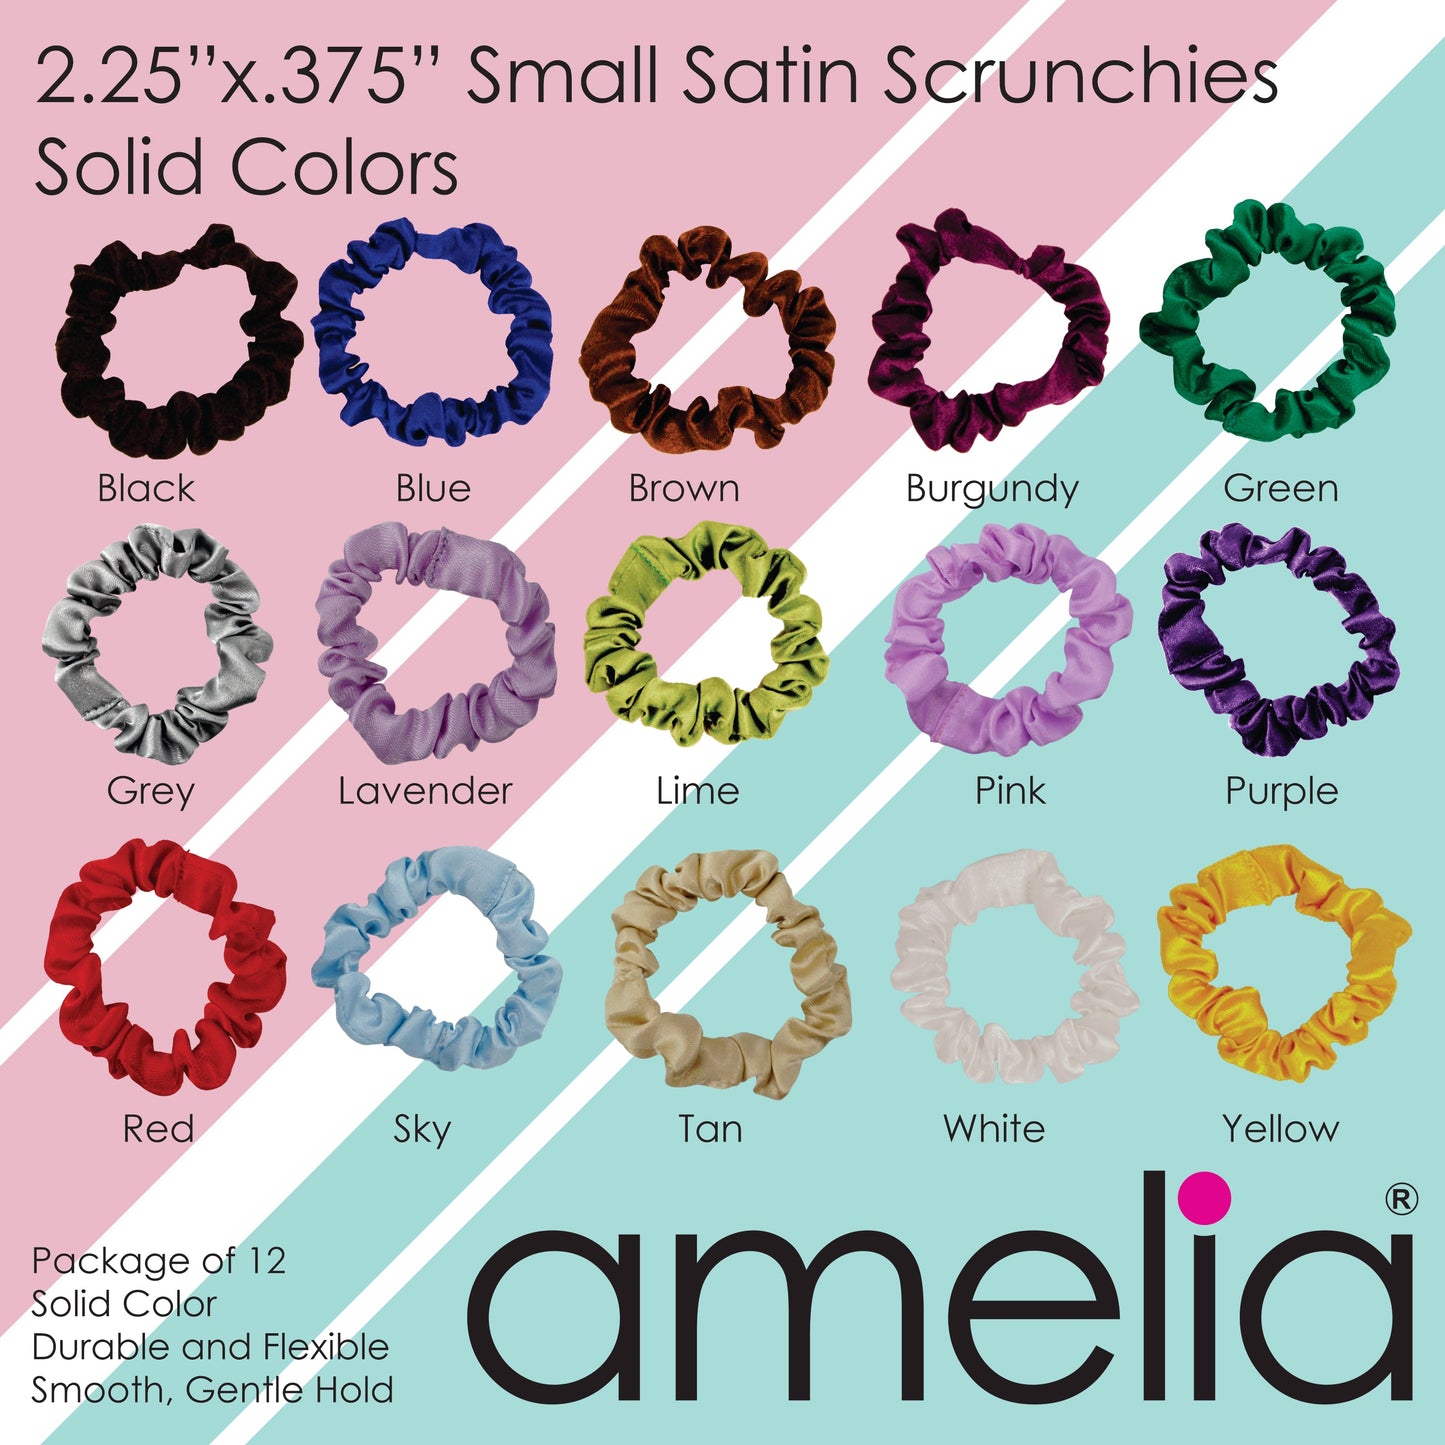 Amelia Beauty, Sky Satin Scrunchies, 2.25in Diameter, Gentle on Hair, Strong Hold, No Snag, No Dents or Creases. 12 Pack - 12 Retail Packs